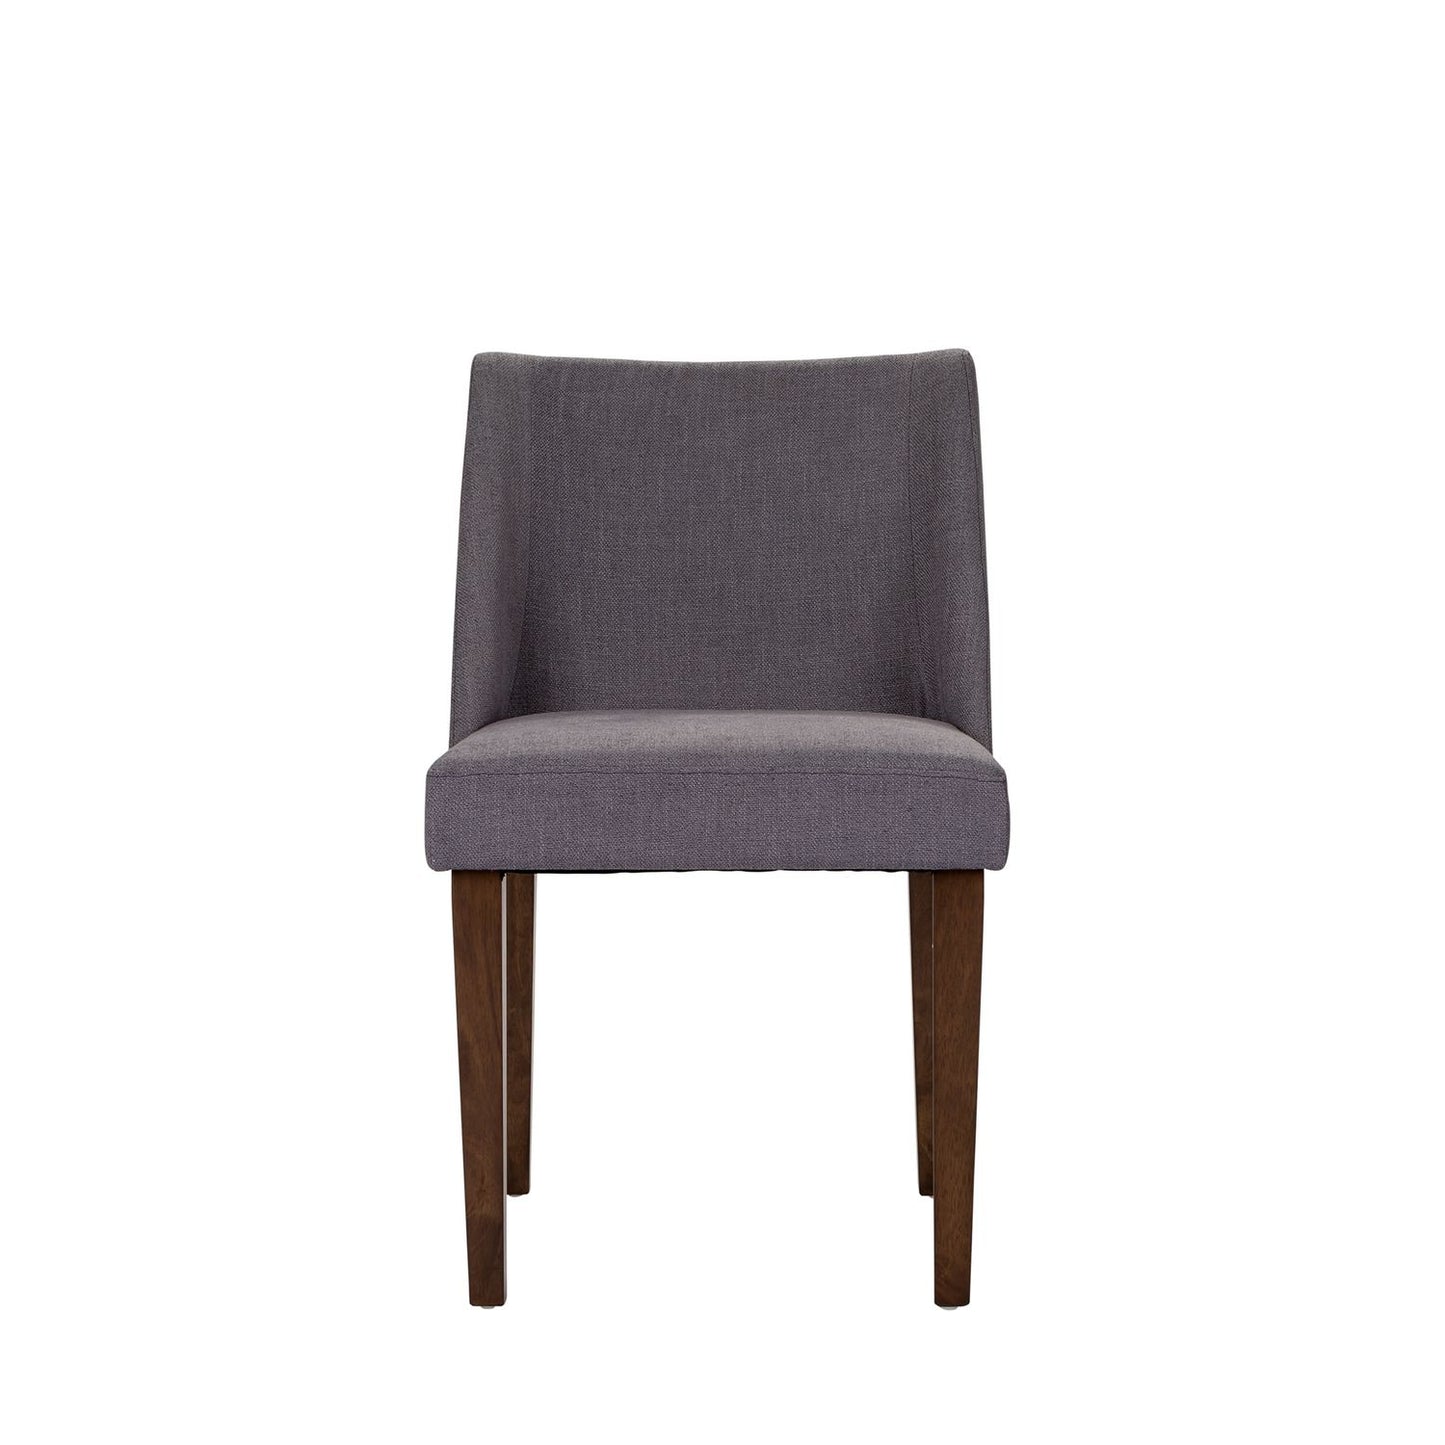 Space Savers Group Nido Dining Or Accent Chair Grey